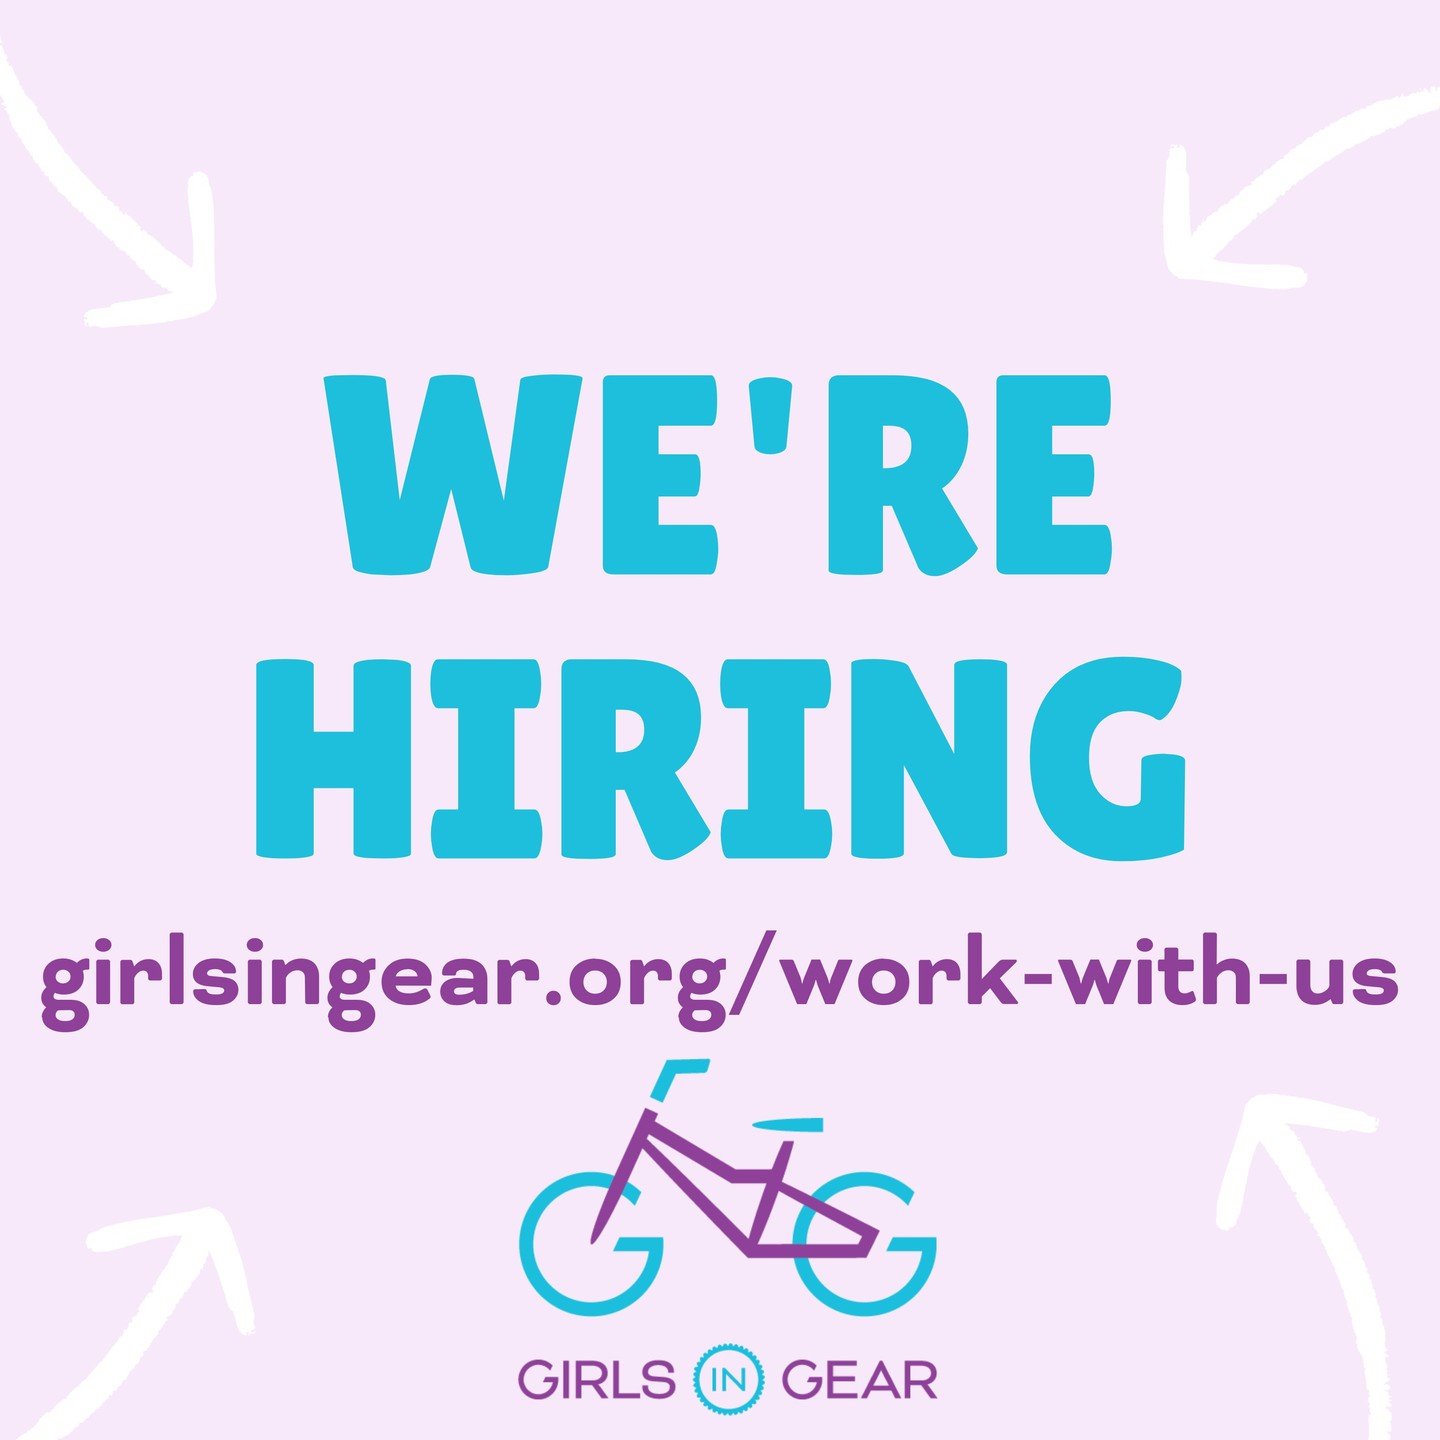 Girls in Gear is hiring! ✨

Girls in Gear is growing, and we want you to join us! We are seeking enthusiastic, hands-on, detail-oriented individuals in New Jersey, Virginia, and the greater Washington, DC, area who are fully committed to growing our 